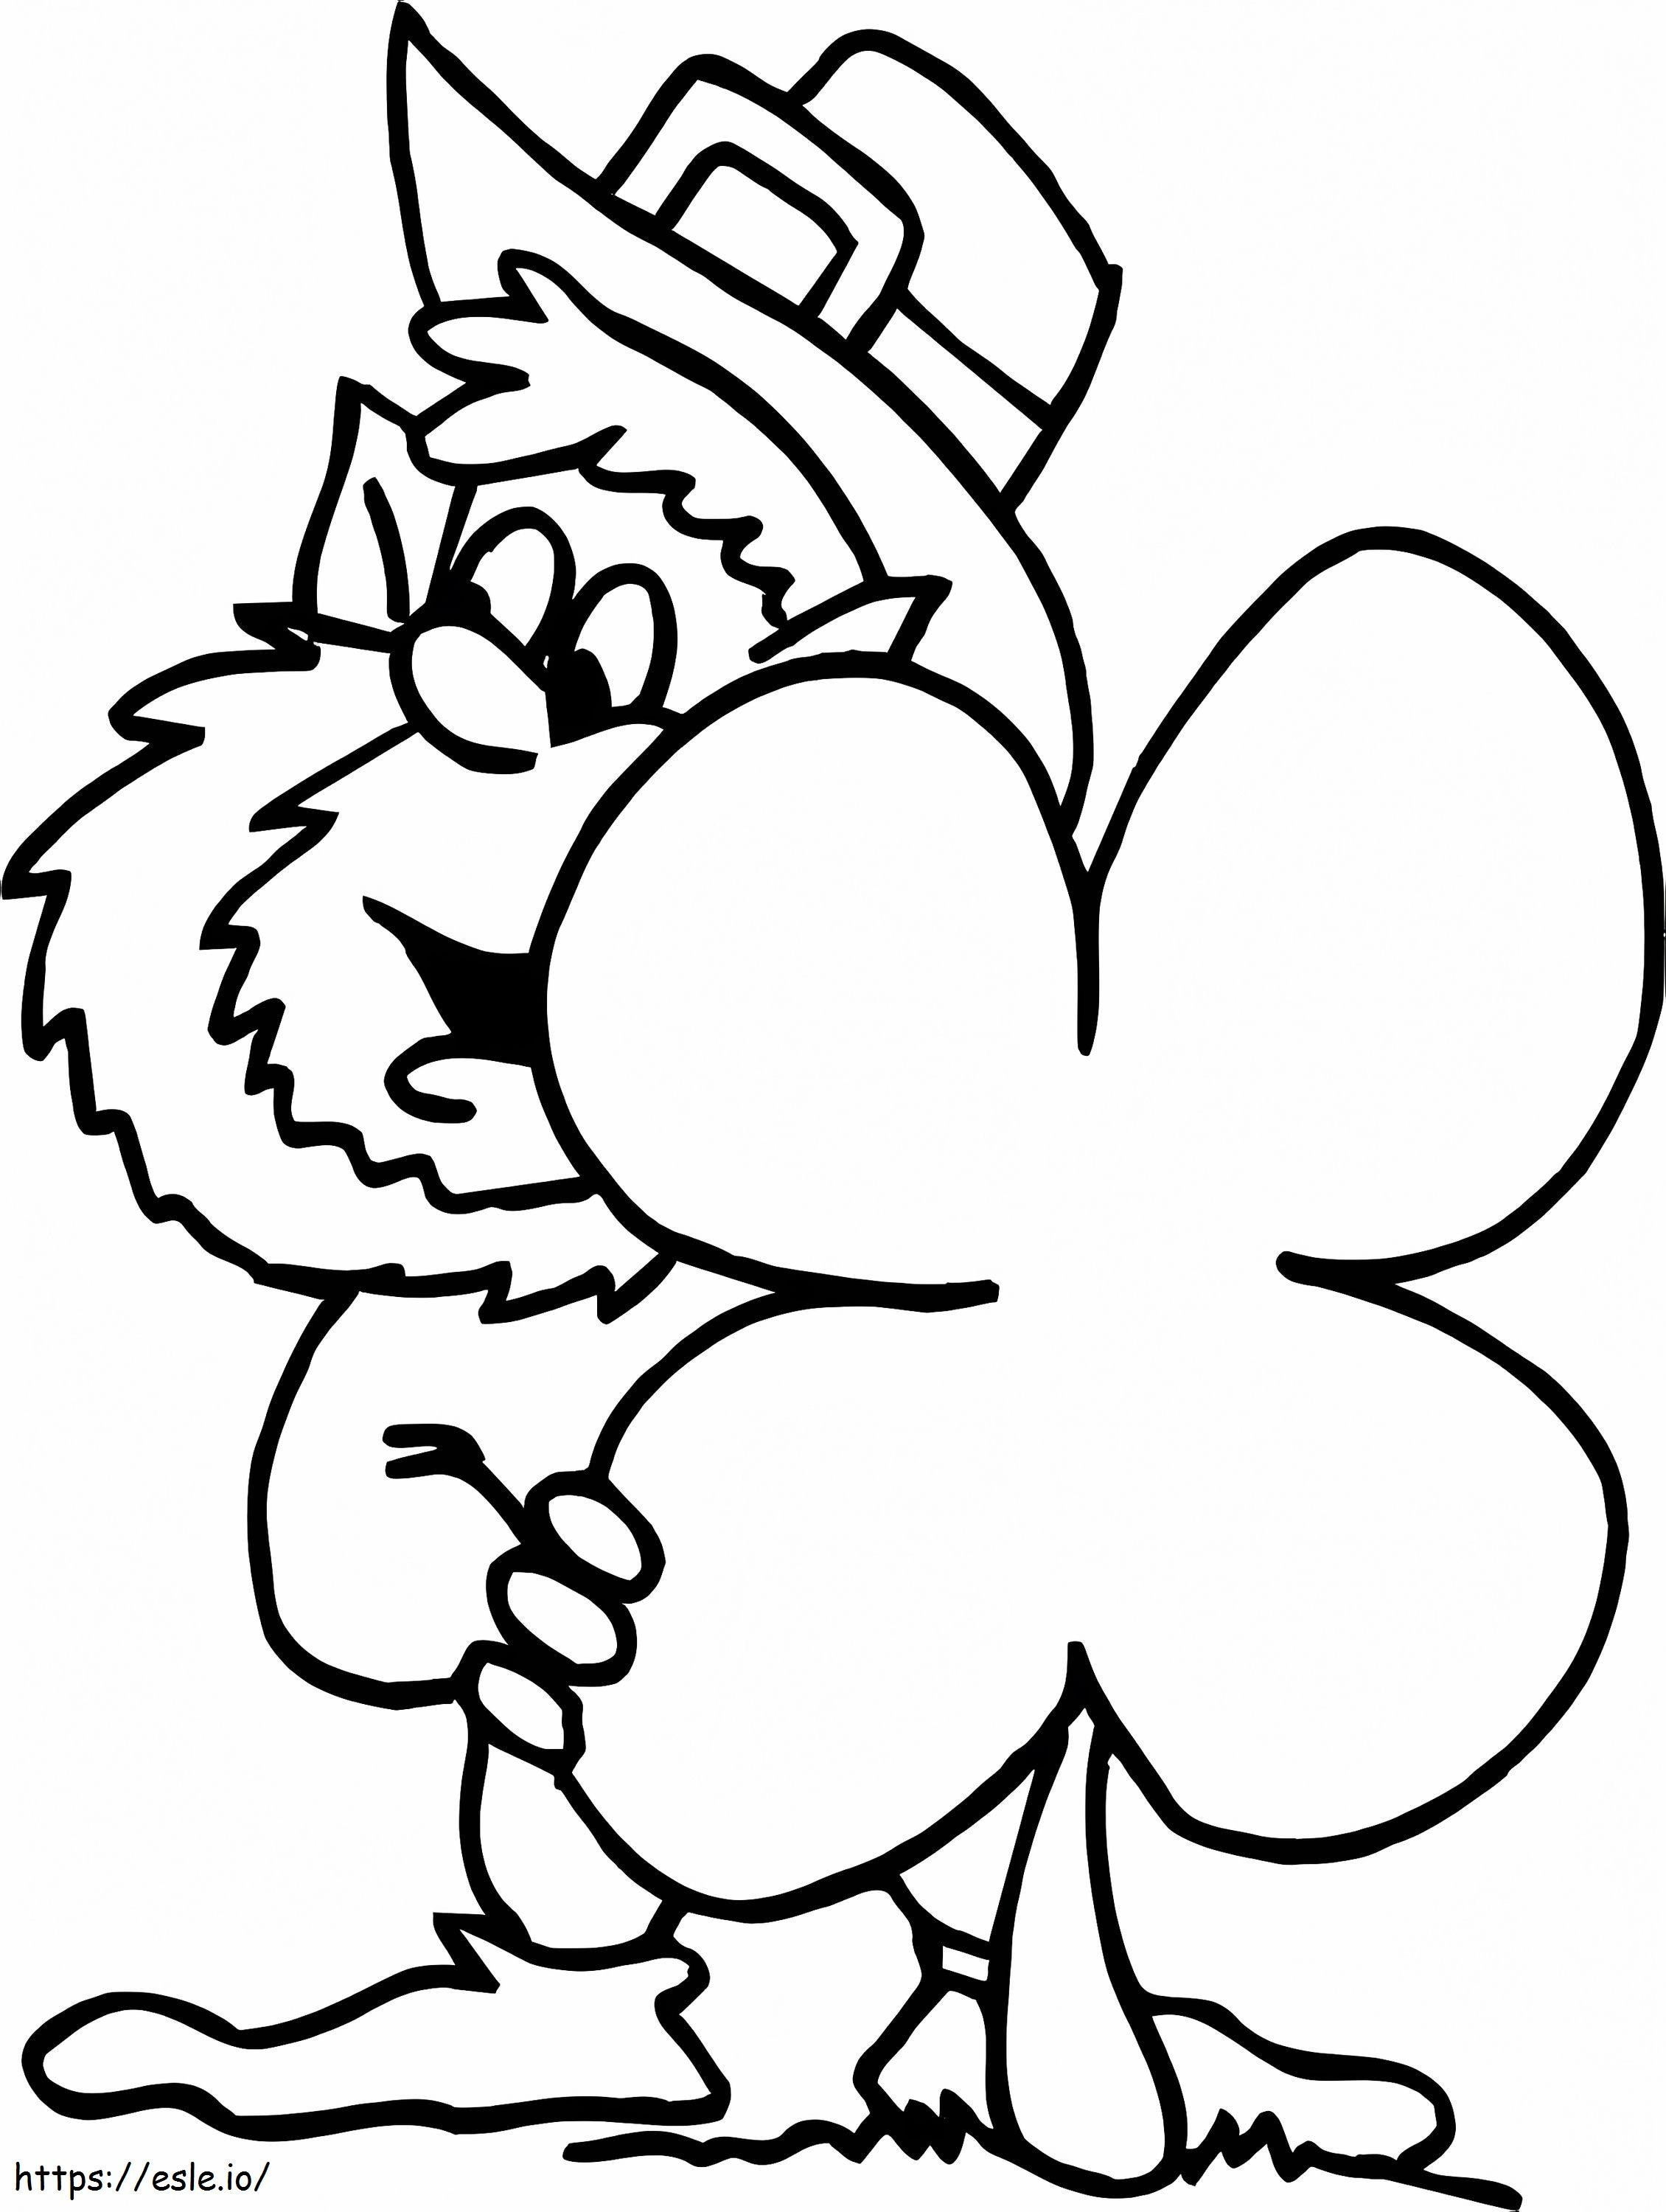 Leprechaun With Four Leaf Clover coloring page